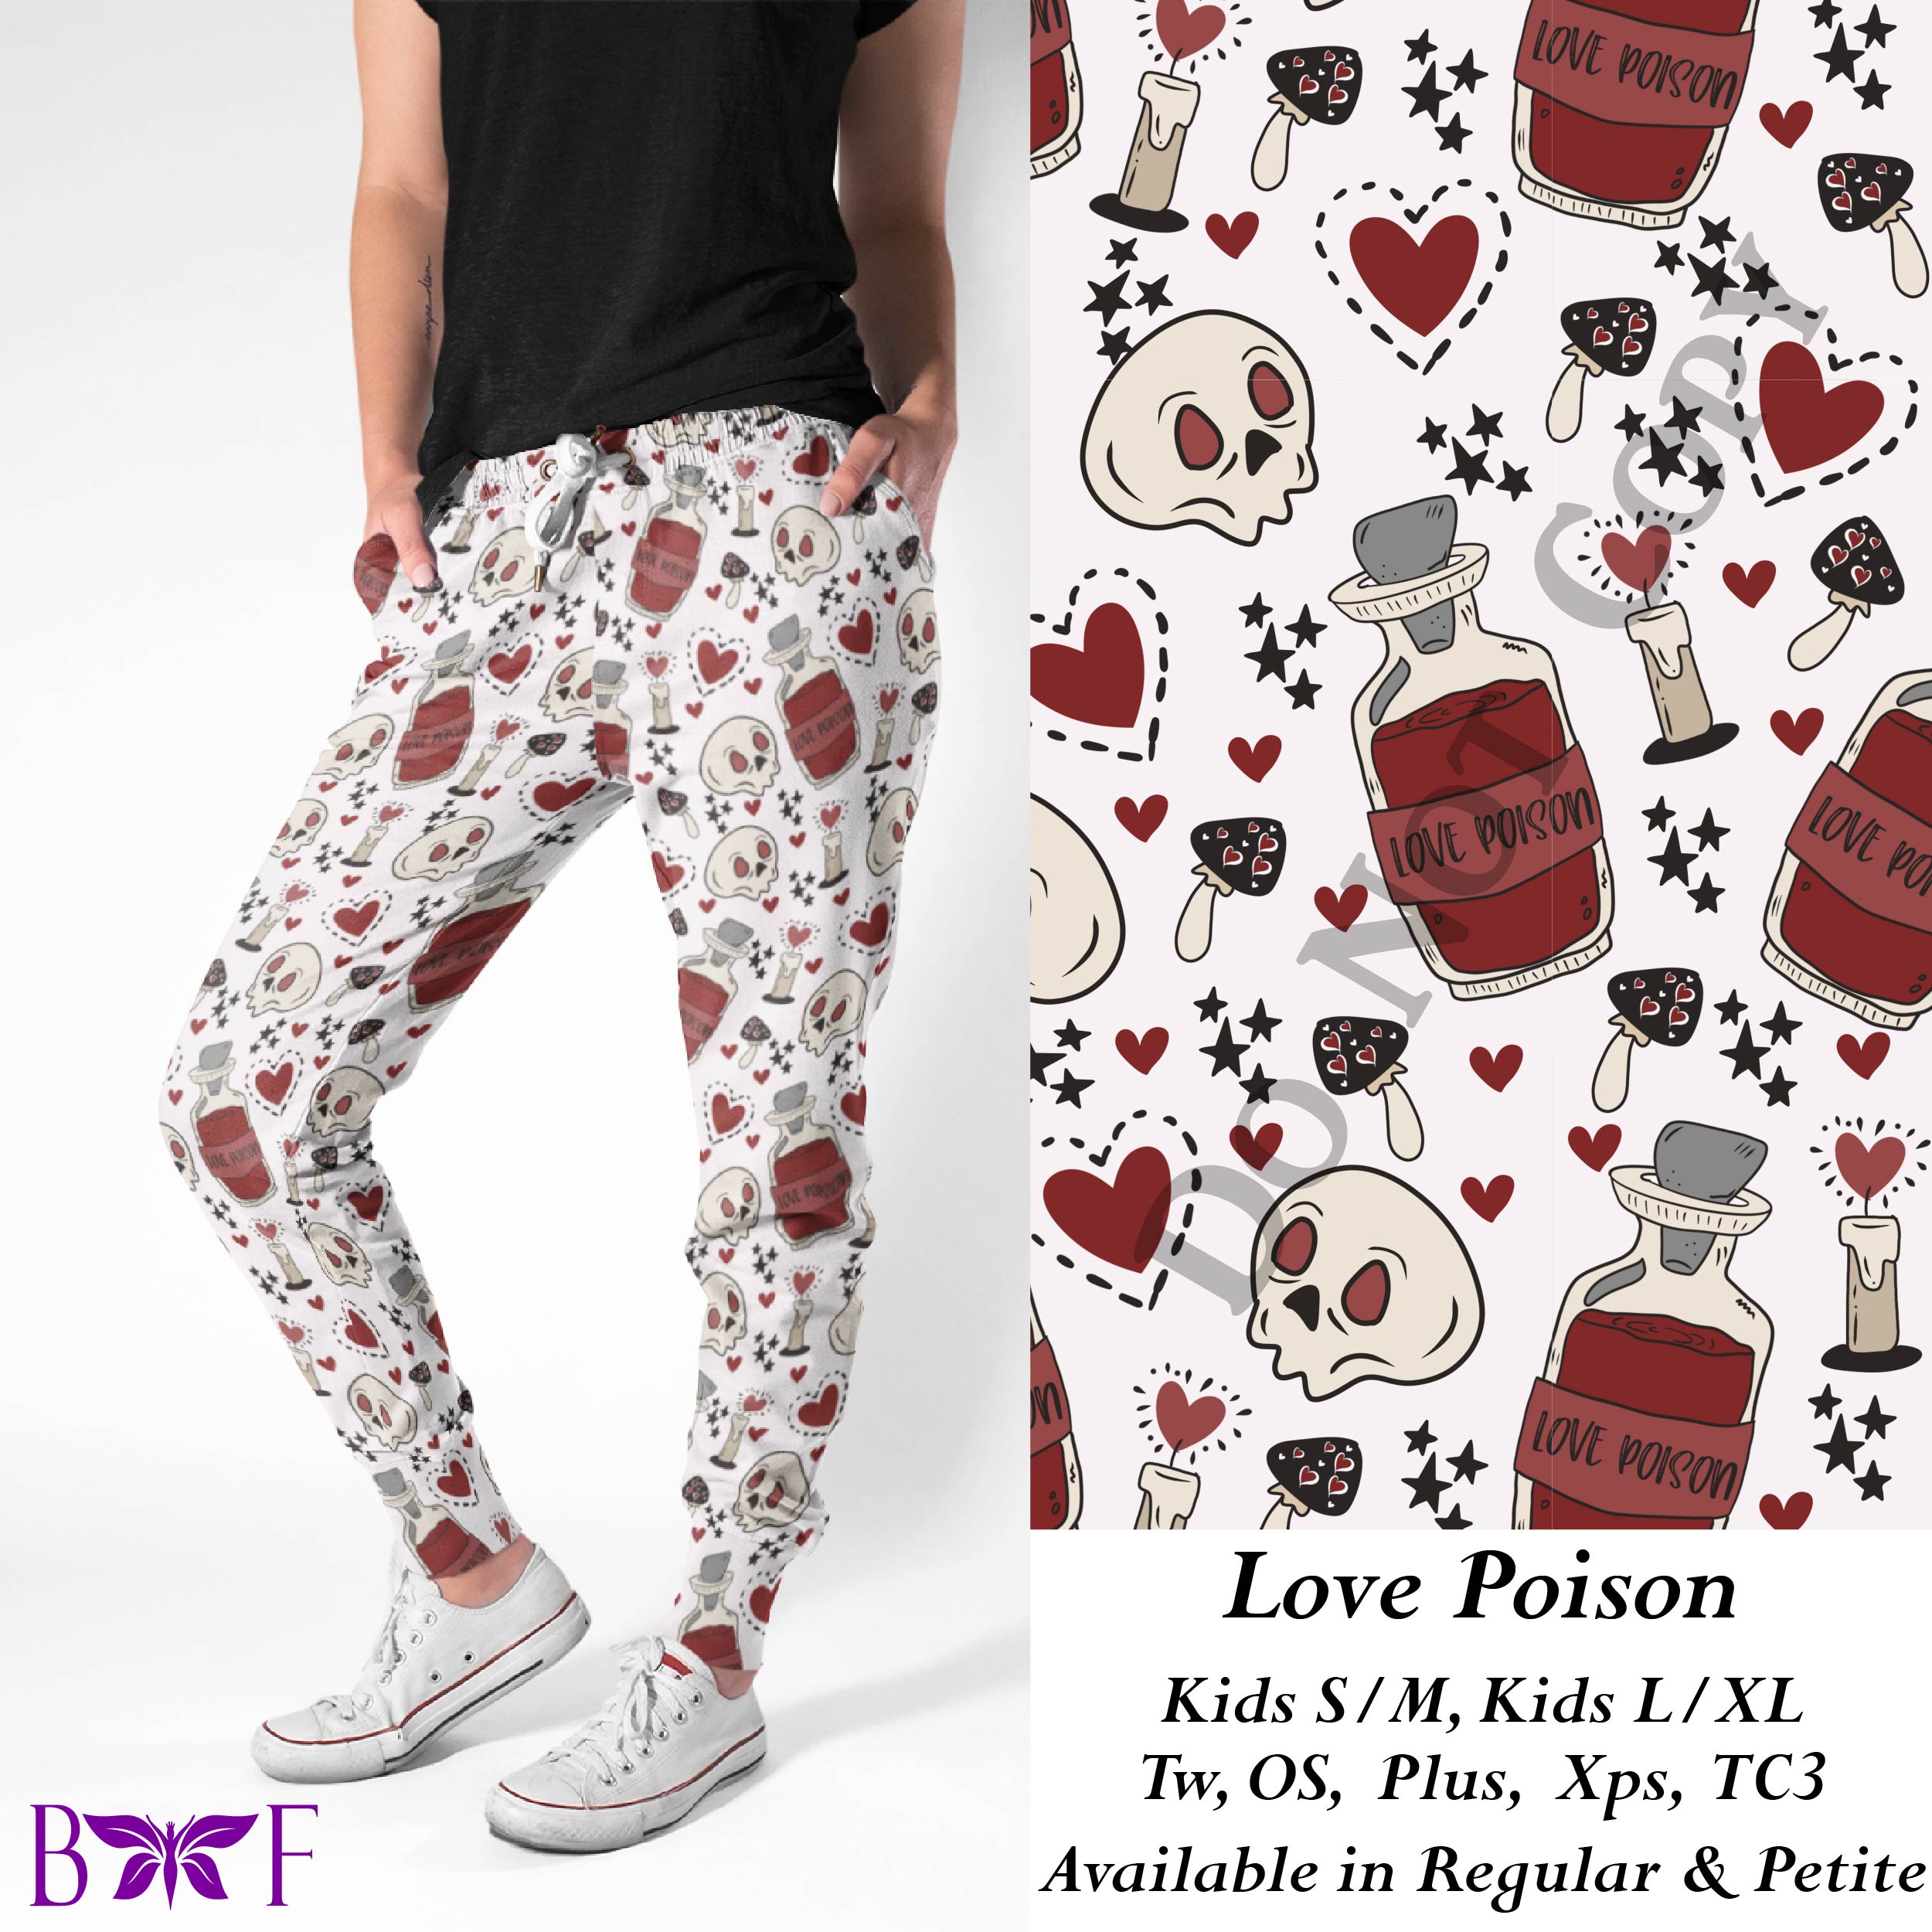 Love Poison leggings with pockets.